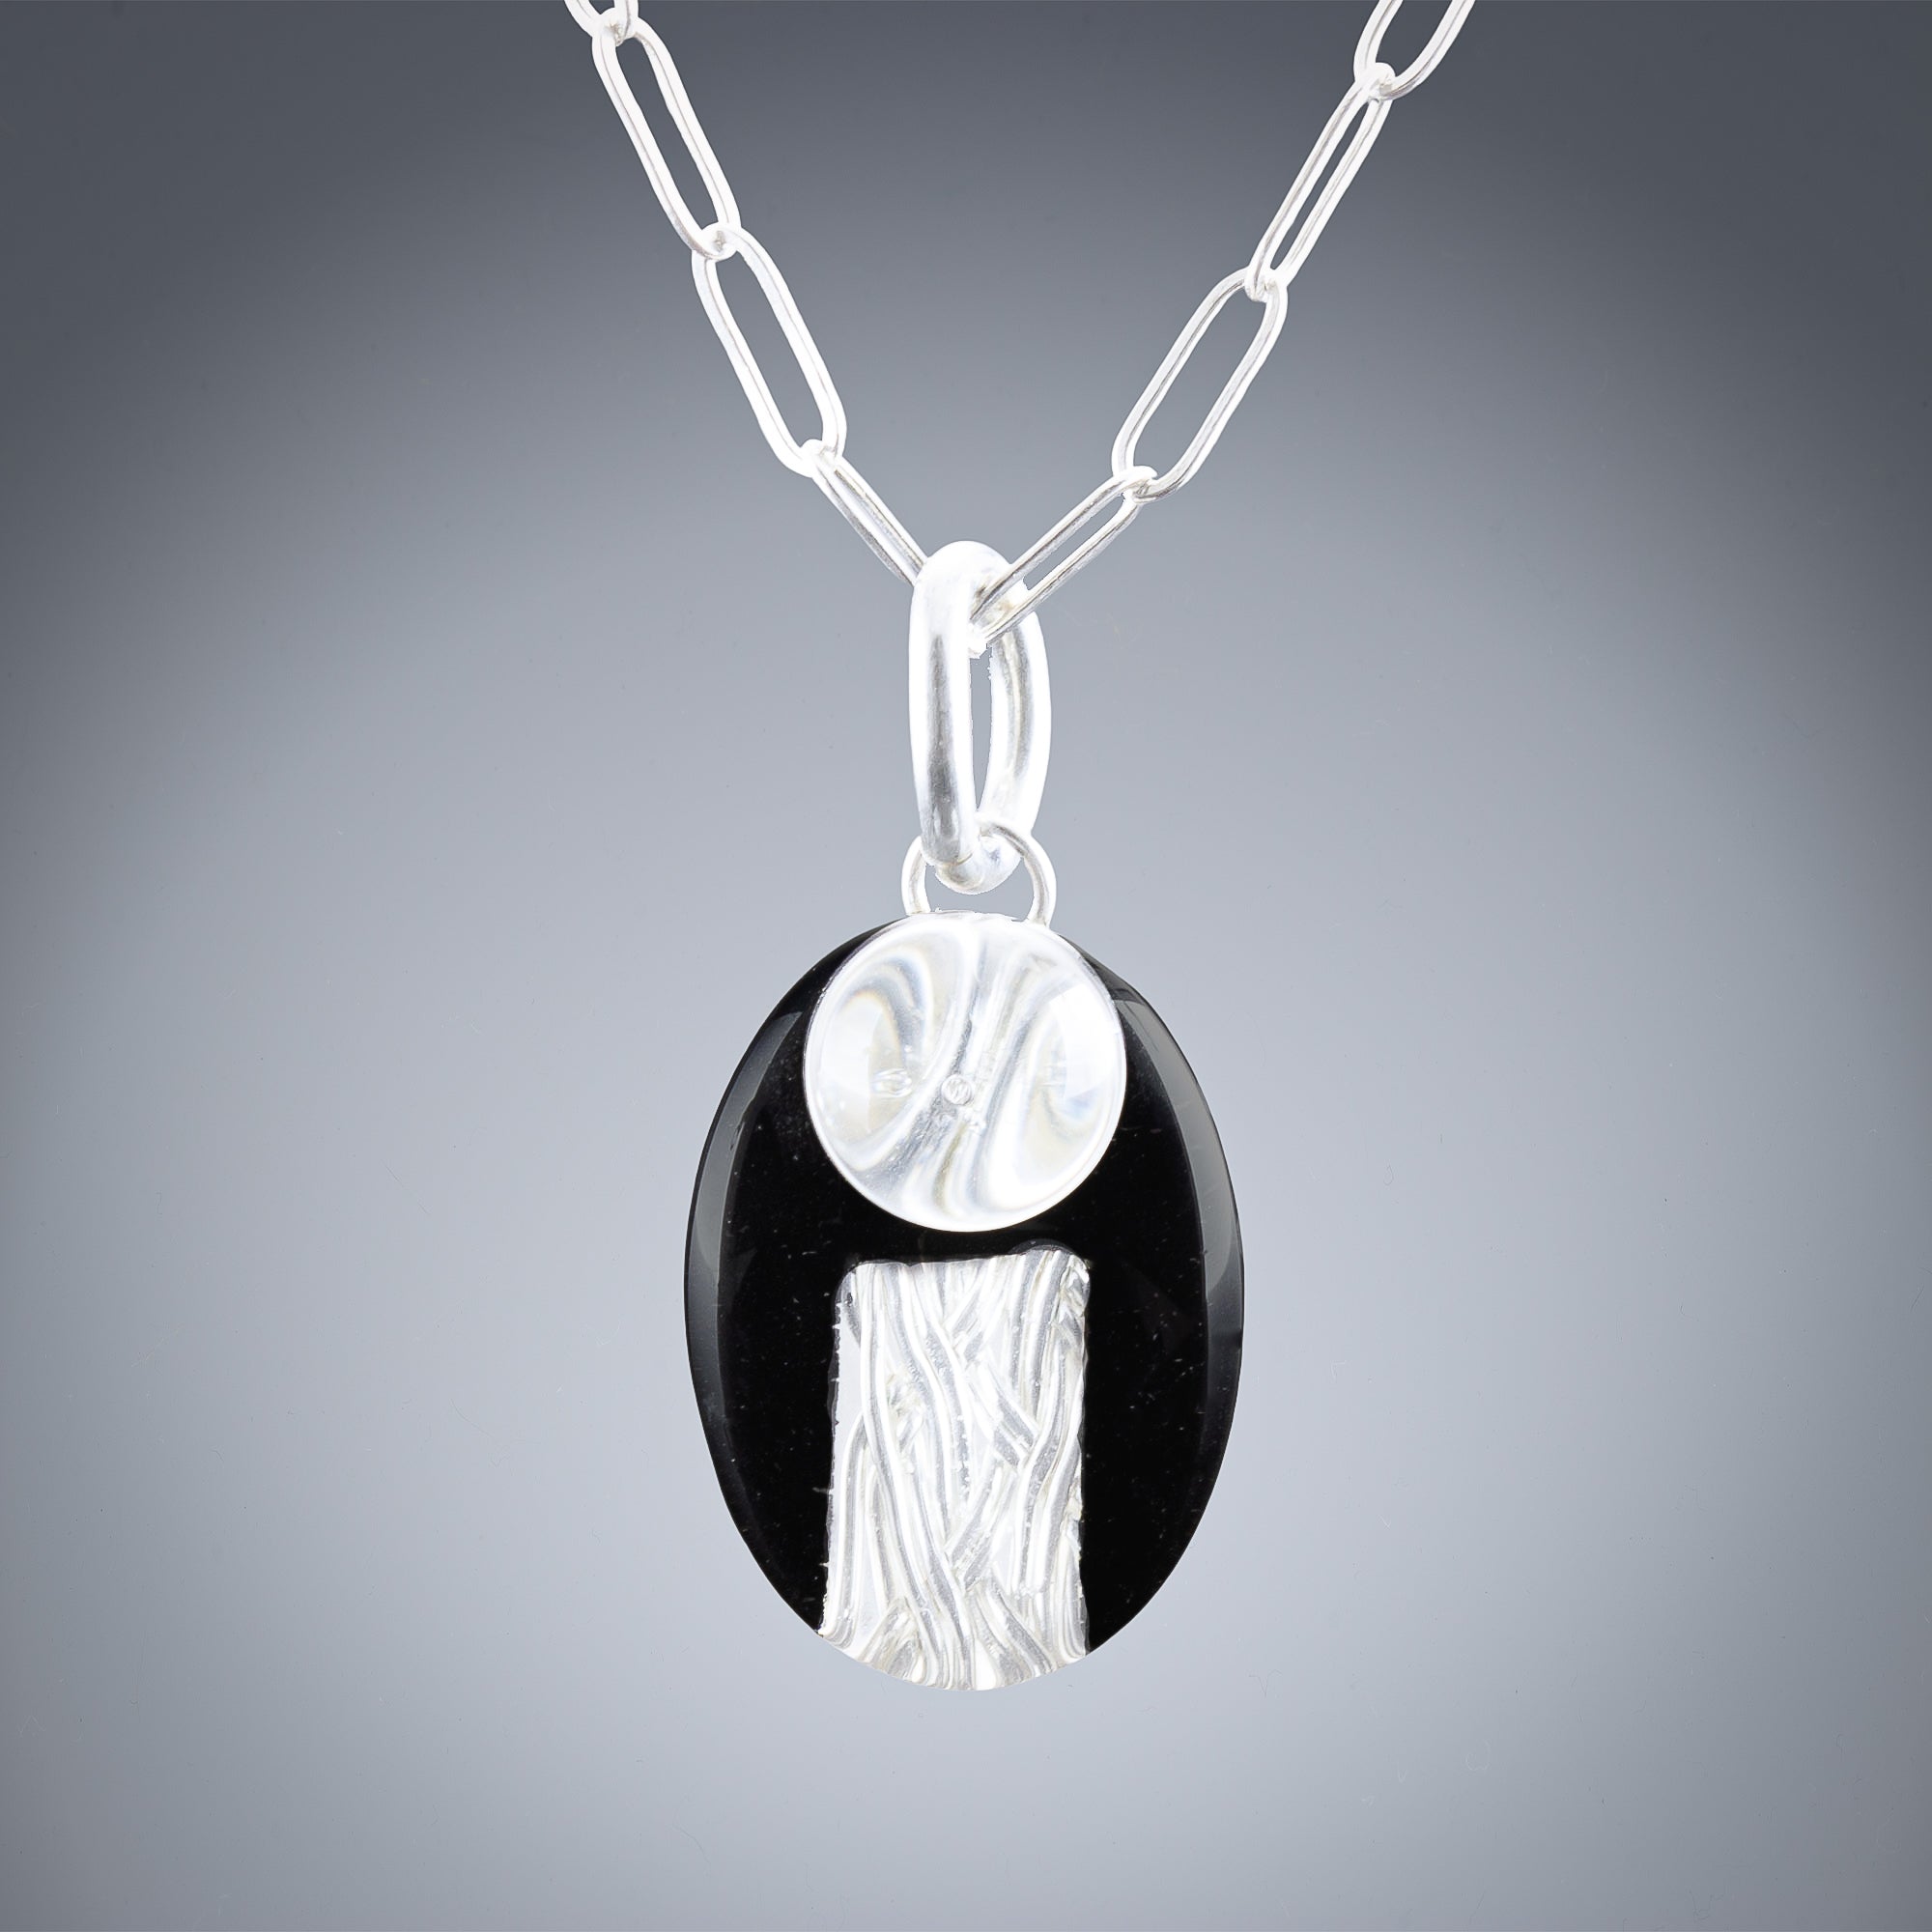 Small Oval Black and Silver Art Deco Inspired Pendant Necklace in Sterling Silver